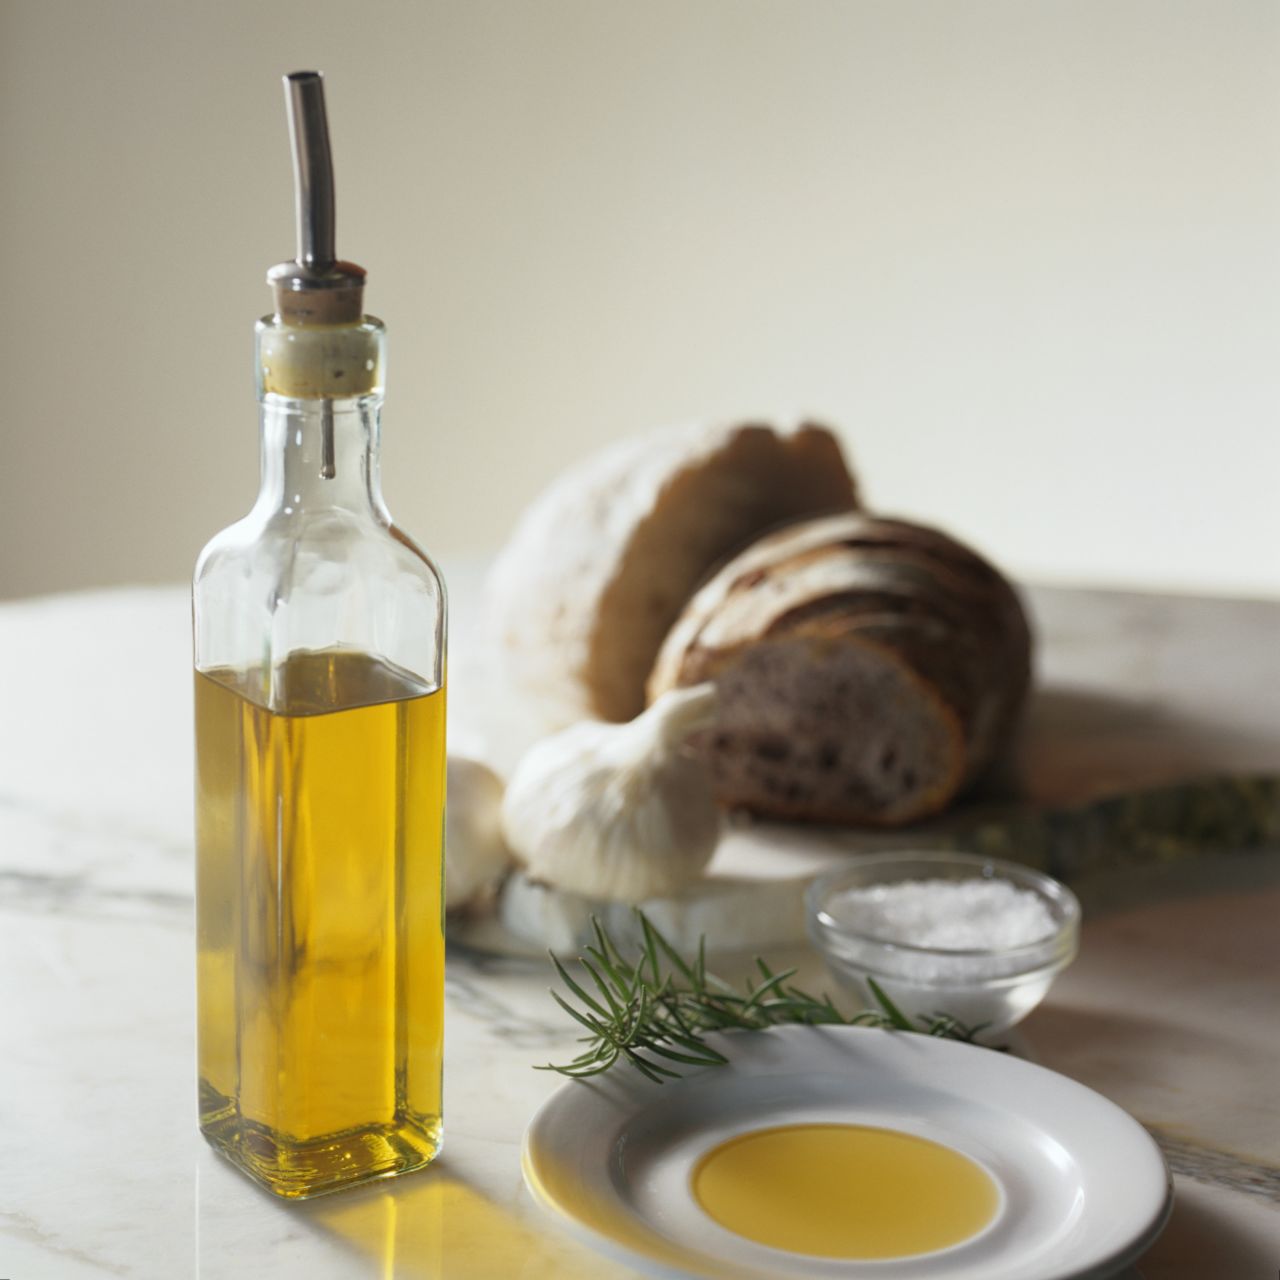 Research shows a Mediterranean style diet, including olive oil and nuts, can lead to <a href="http://archinte.jamanetwork.com/article.aspx?articleid=2293082" target="_blank" target="_blank">improved cognitive function</a>.